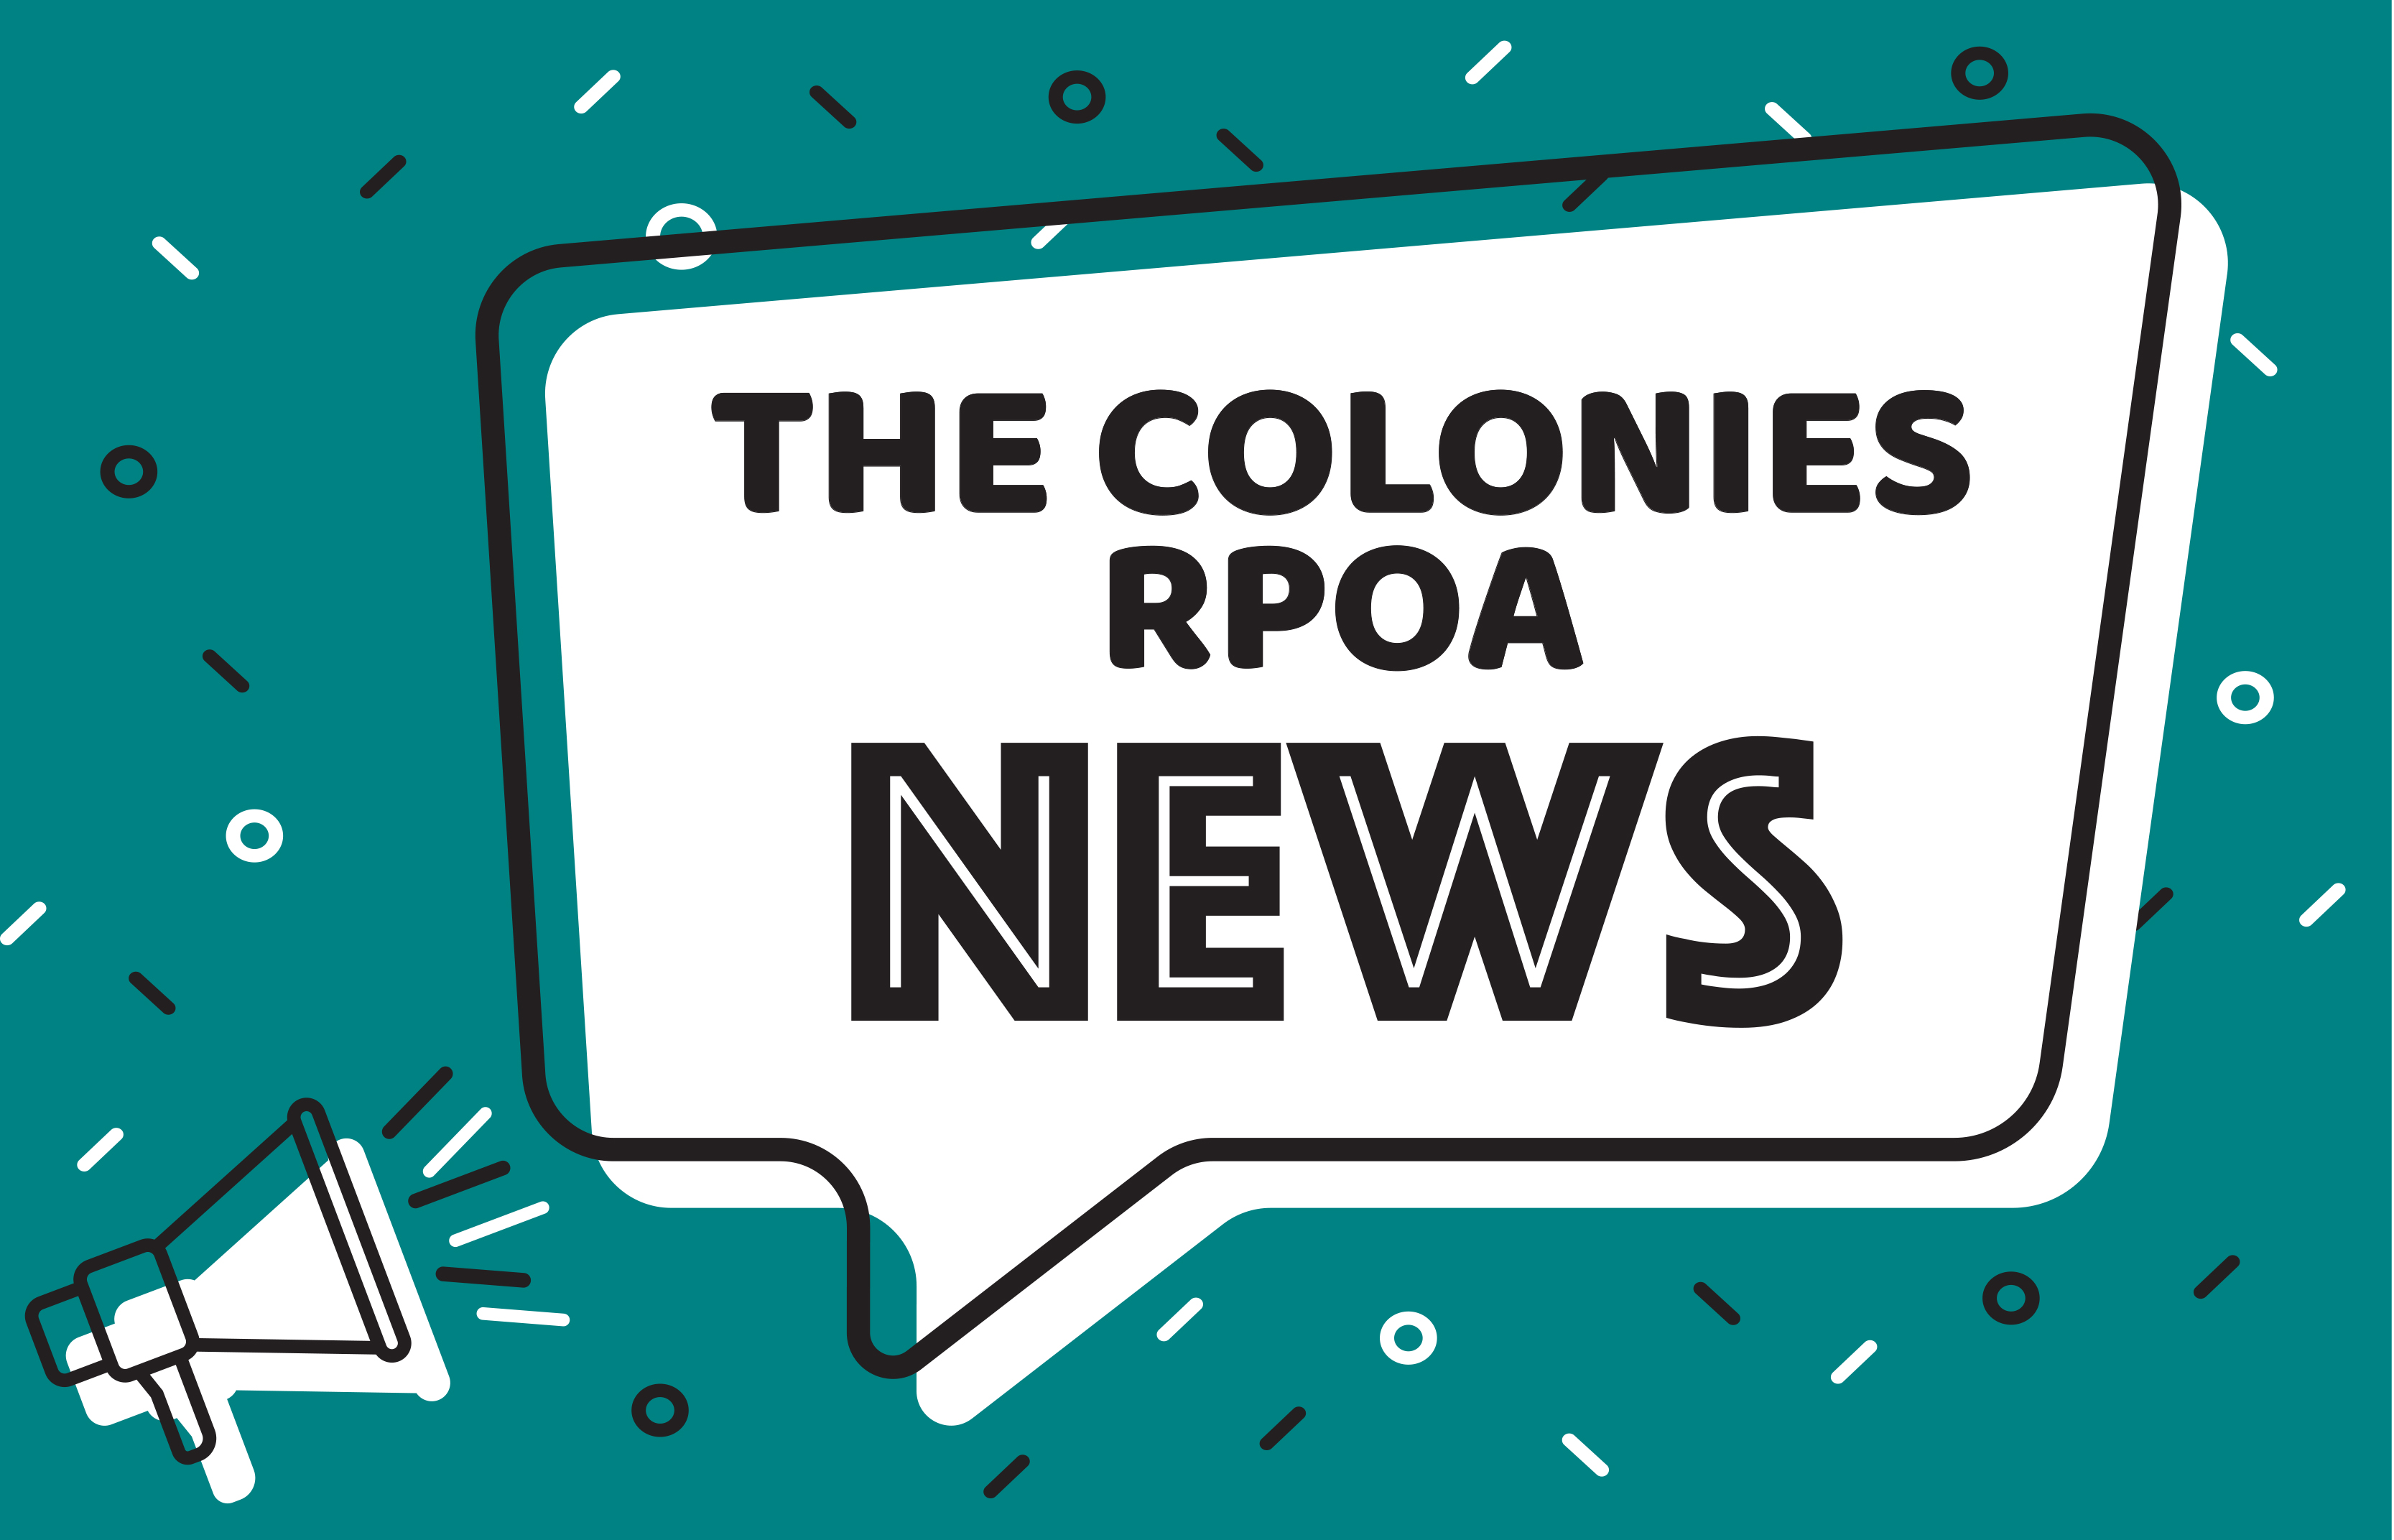 The Colonies RPOA March News